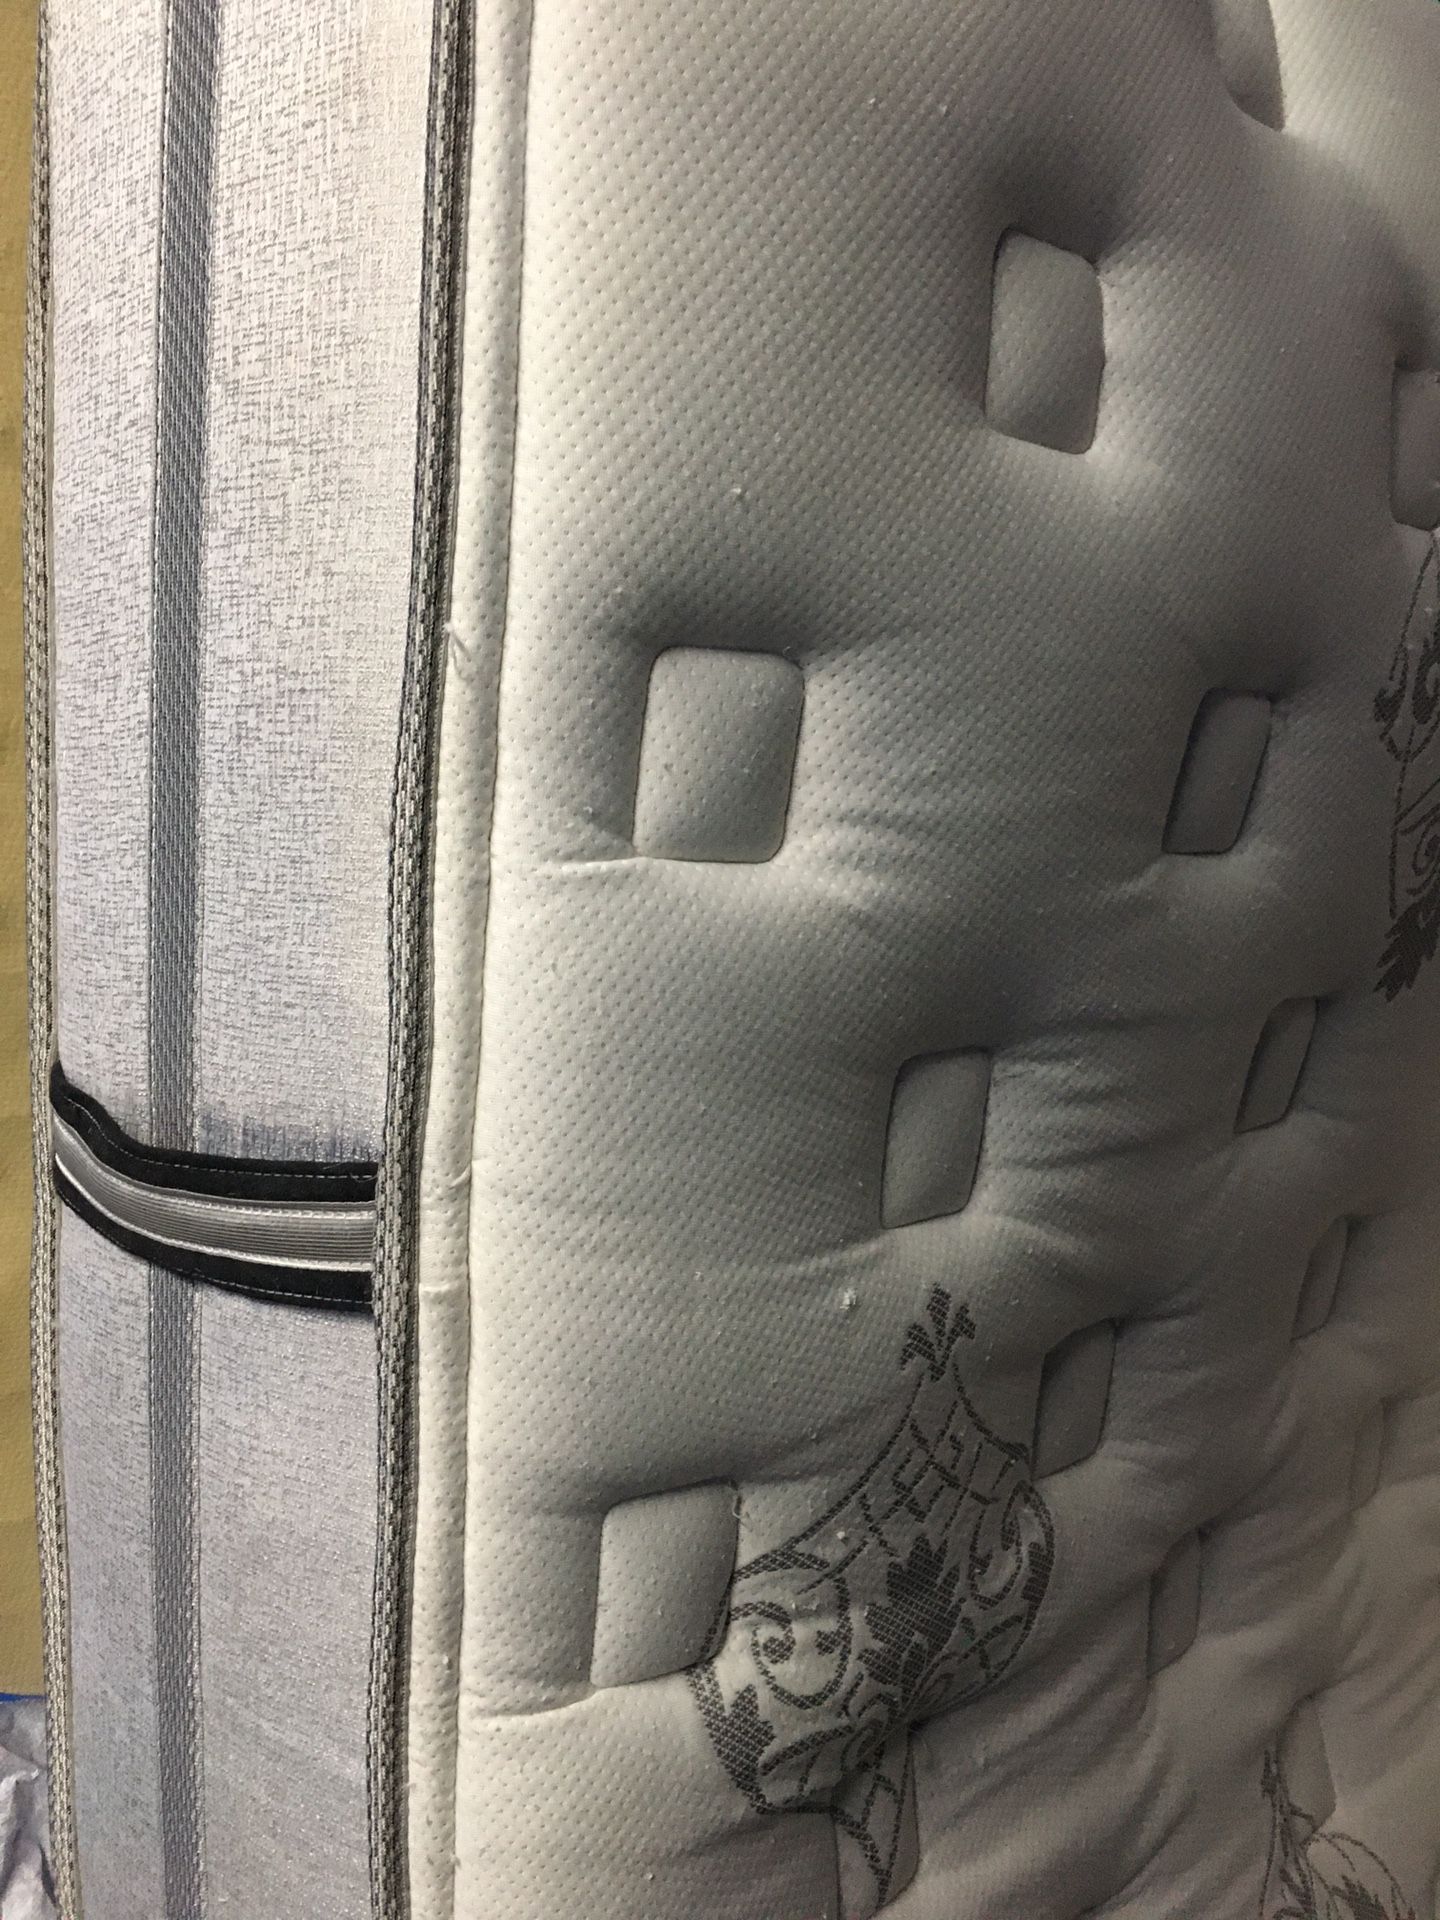 Queen pillow top mattress with box springs included 250. I can also deliver